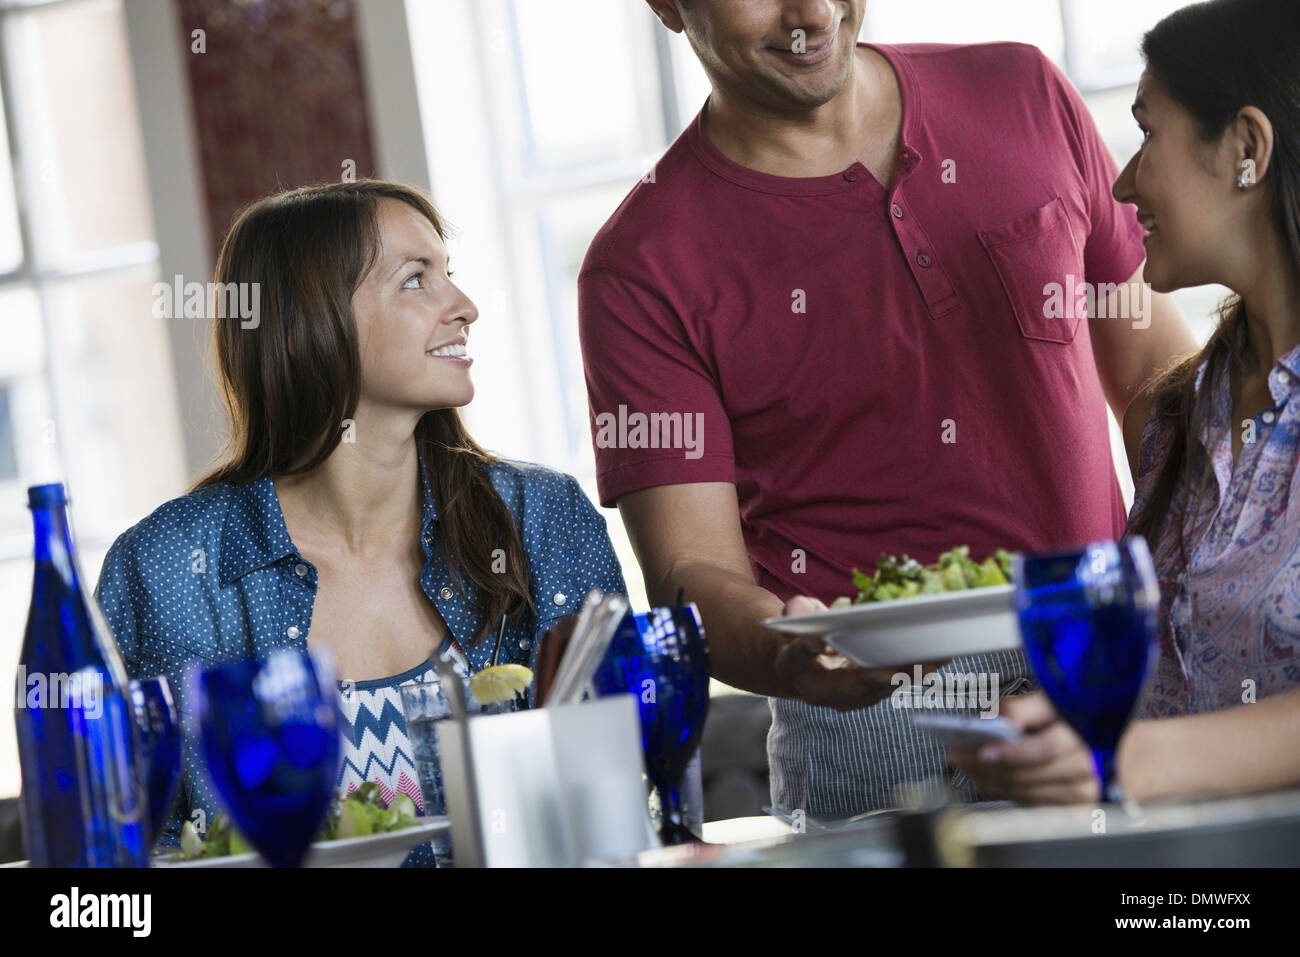 A cafe interior. A man in a waiter's apron serving a meal to two women at a table. Stock Photo